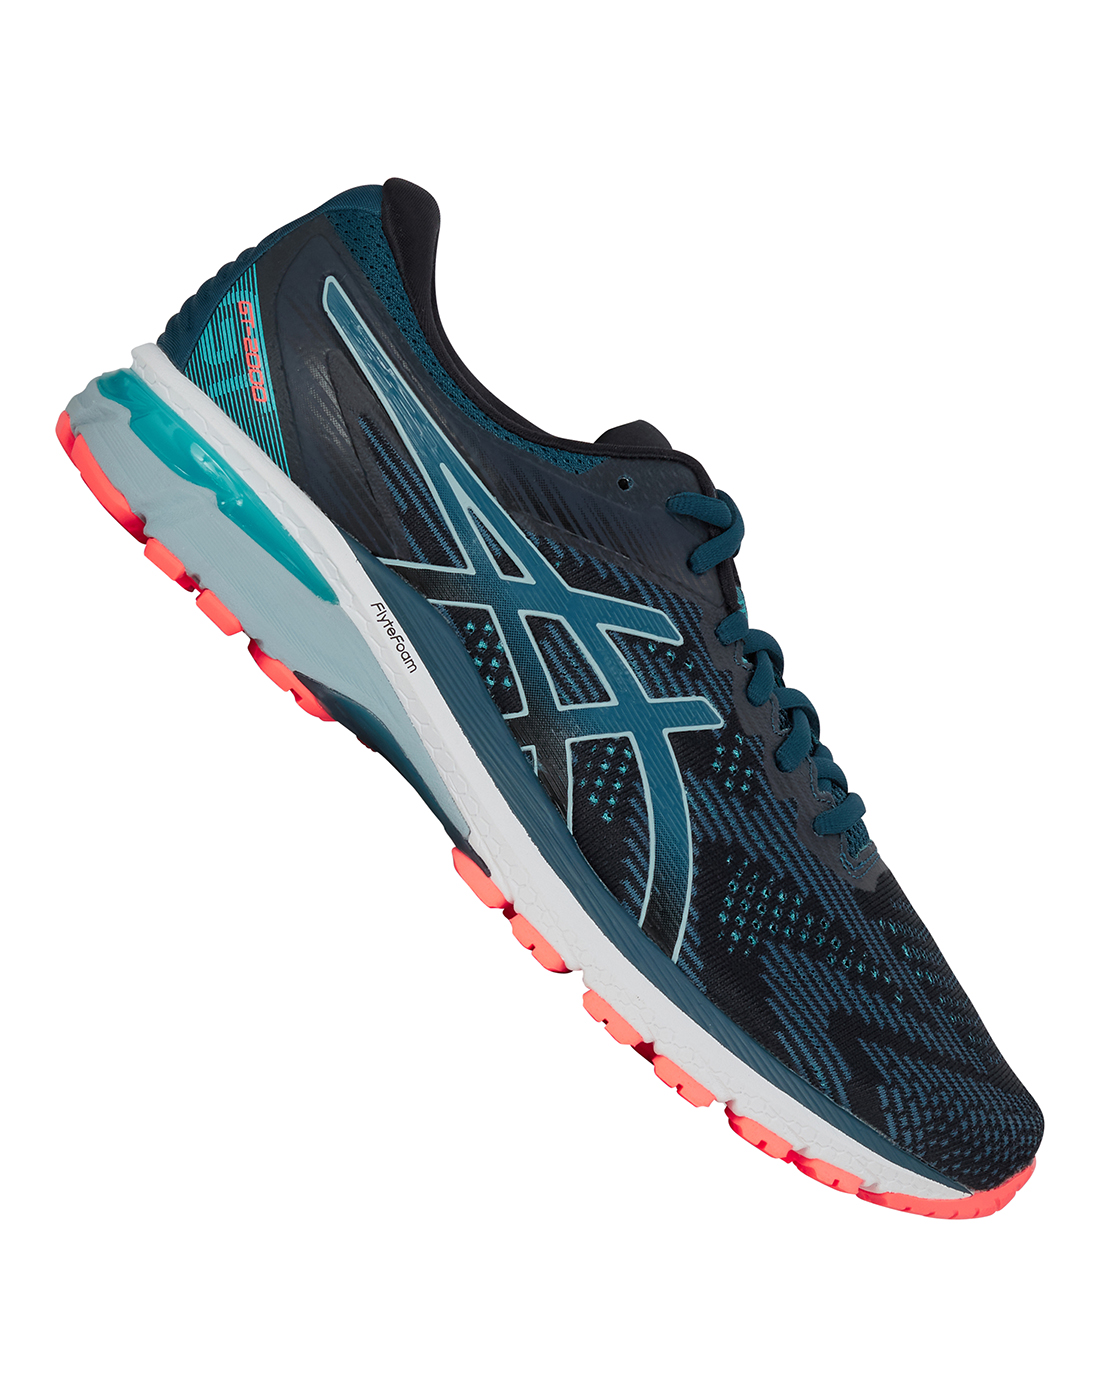 Asics Mens Gt-2000 8 - Black | Life Style Sports IE